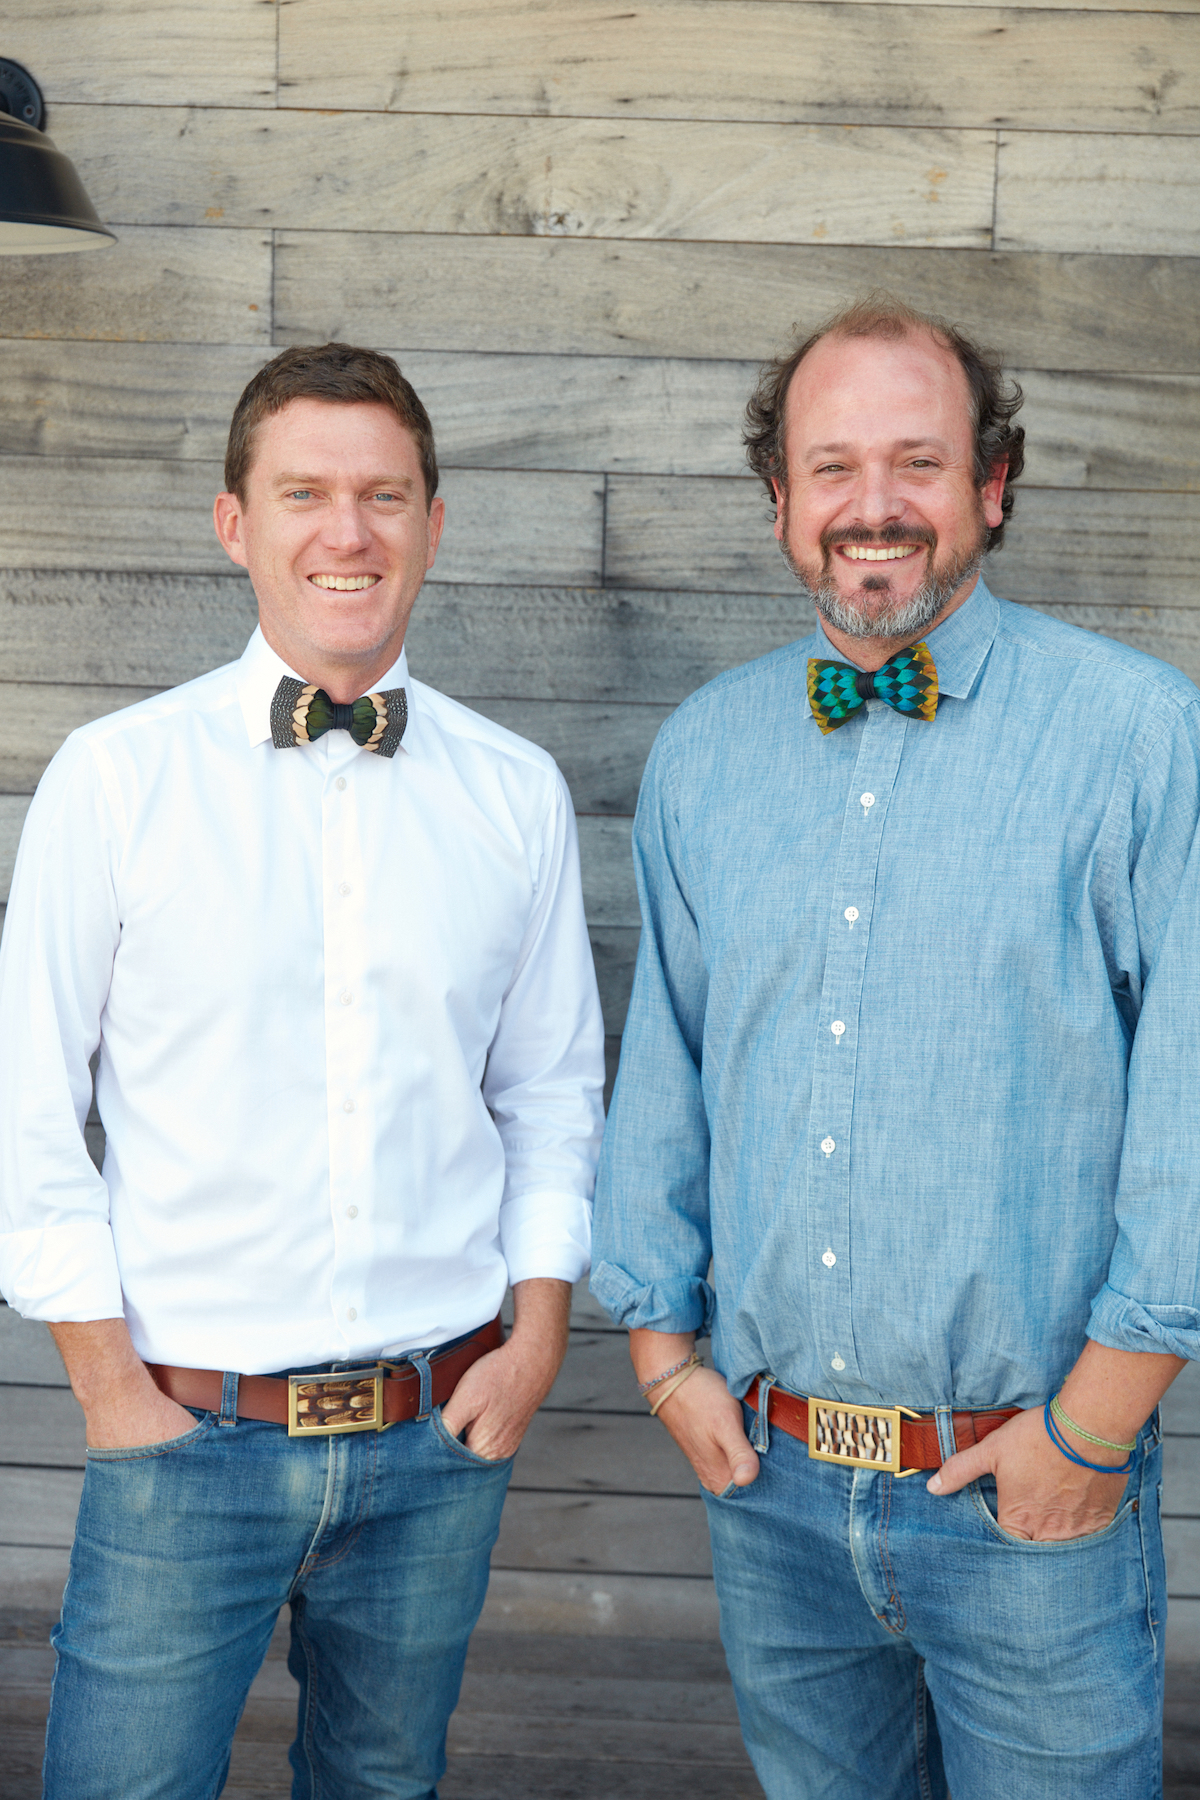 Brackish, a New West Village Store, Sells Feather Bowties and Accessories -  D Magazine